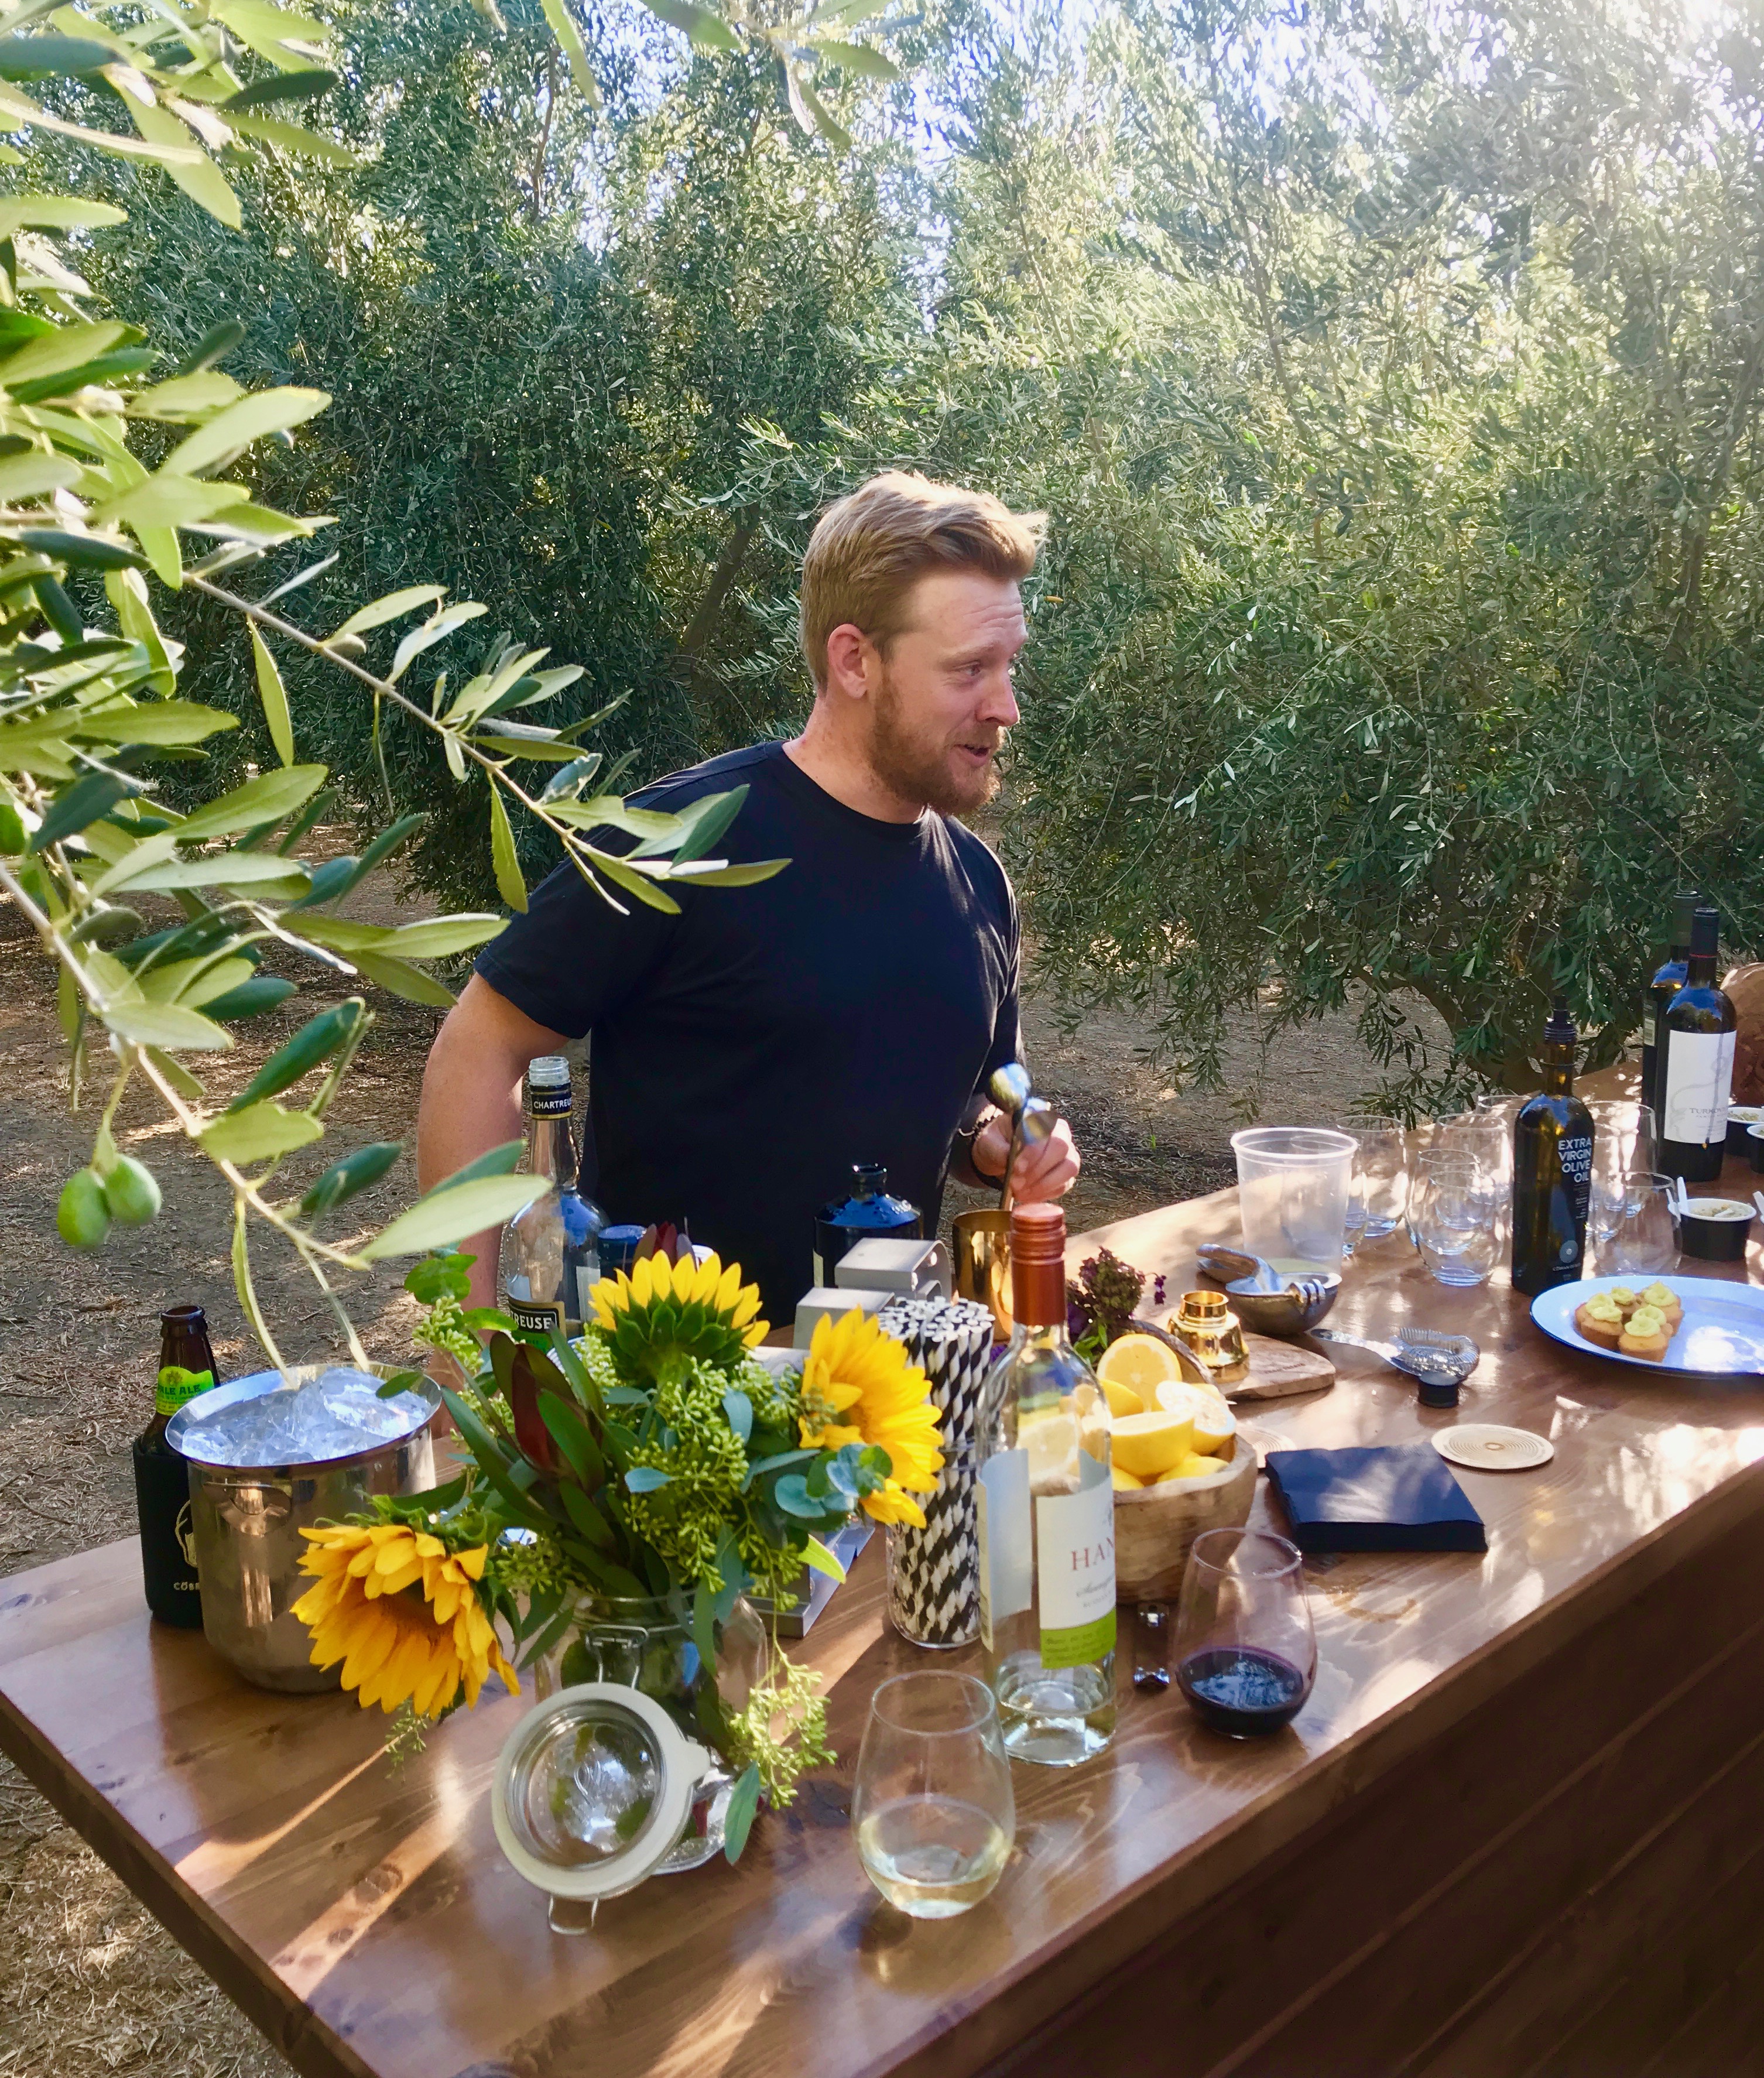 Chef with beard stands behind counter in the middle of an olive grove. Table has wine, steel drink container, flowers, and small plates of food.